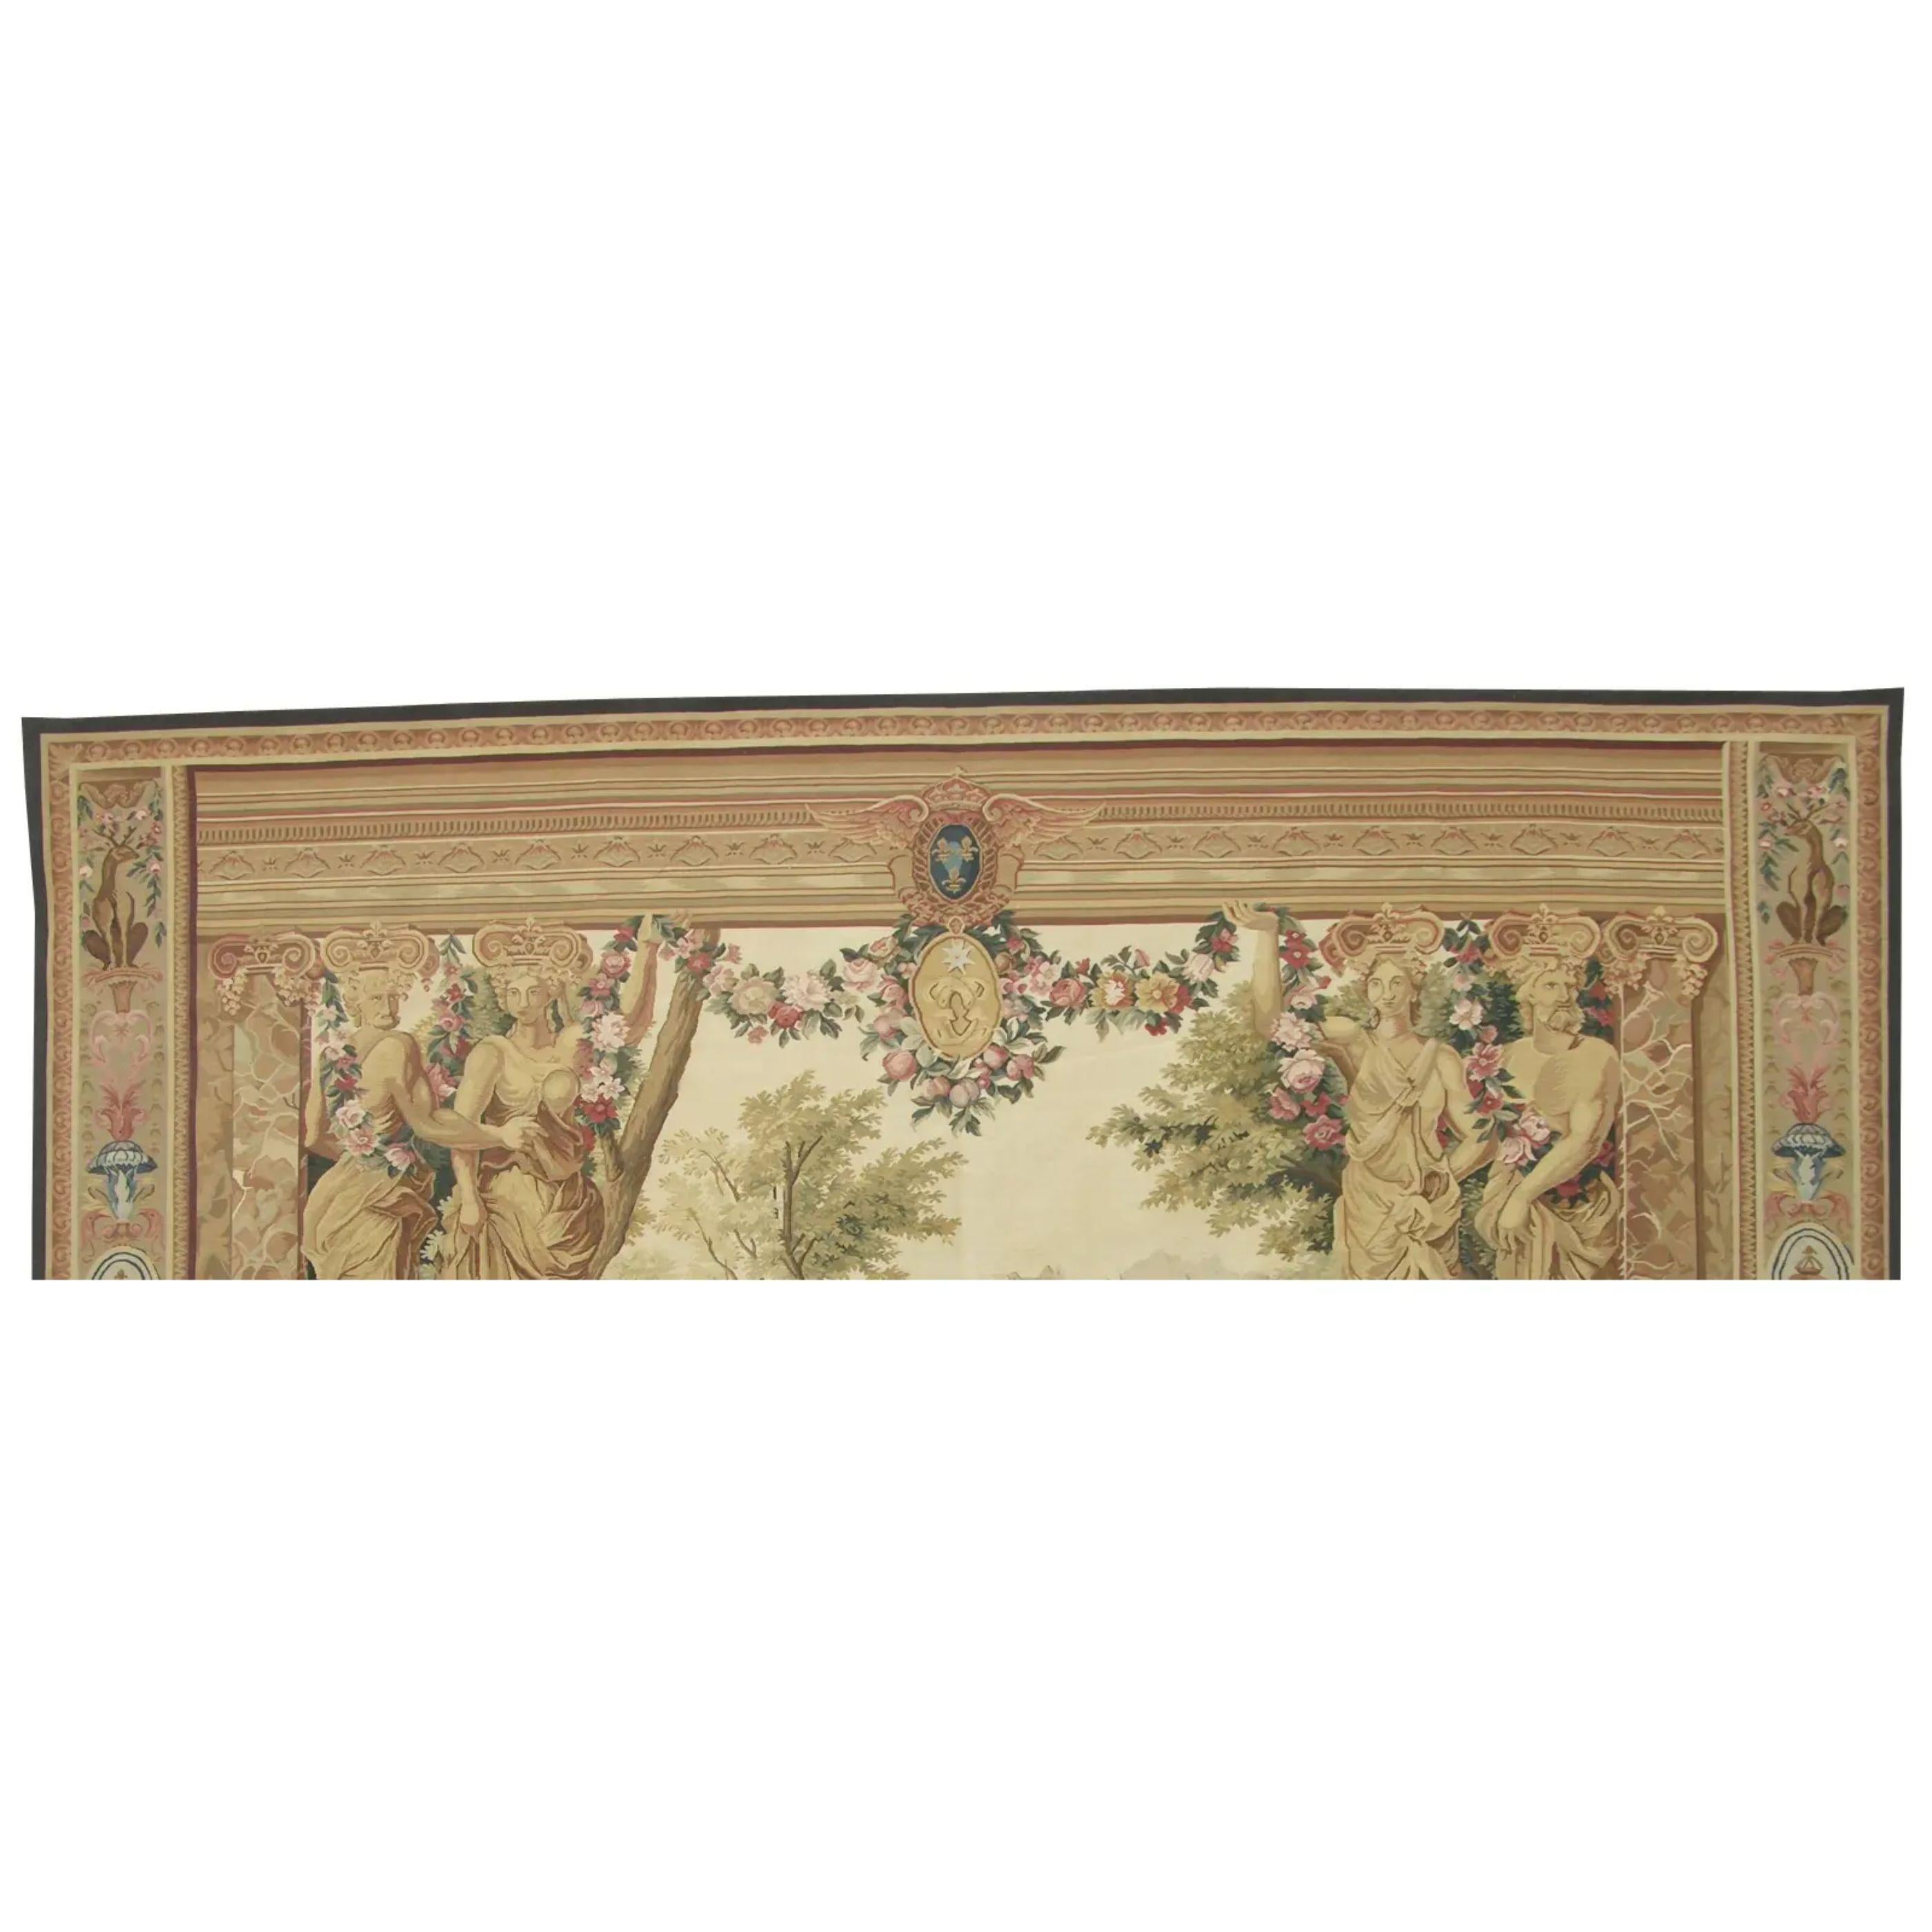 Empire Vintage Tapestry Depicting Royal Figures 9.9X6.4 For Sale